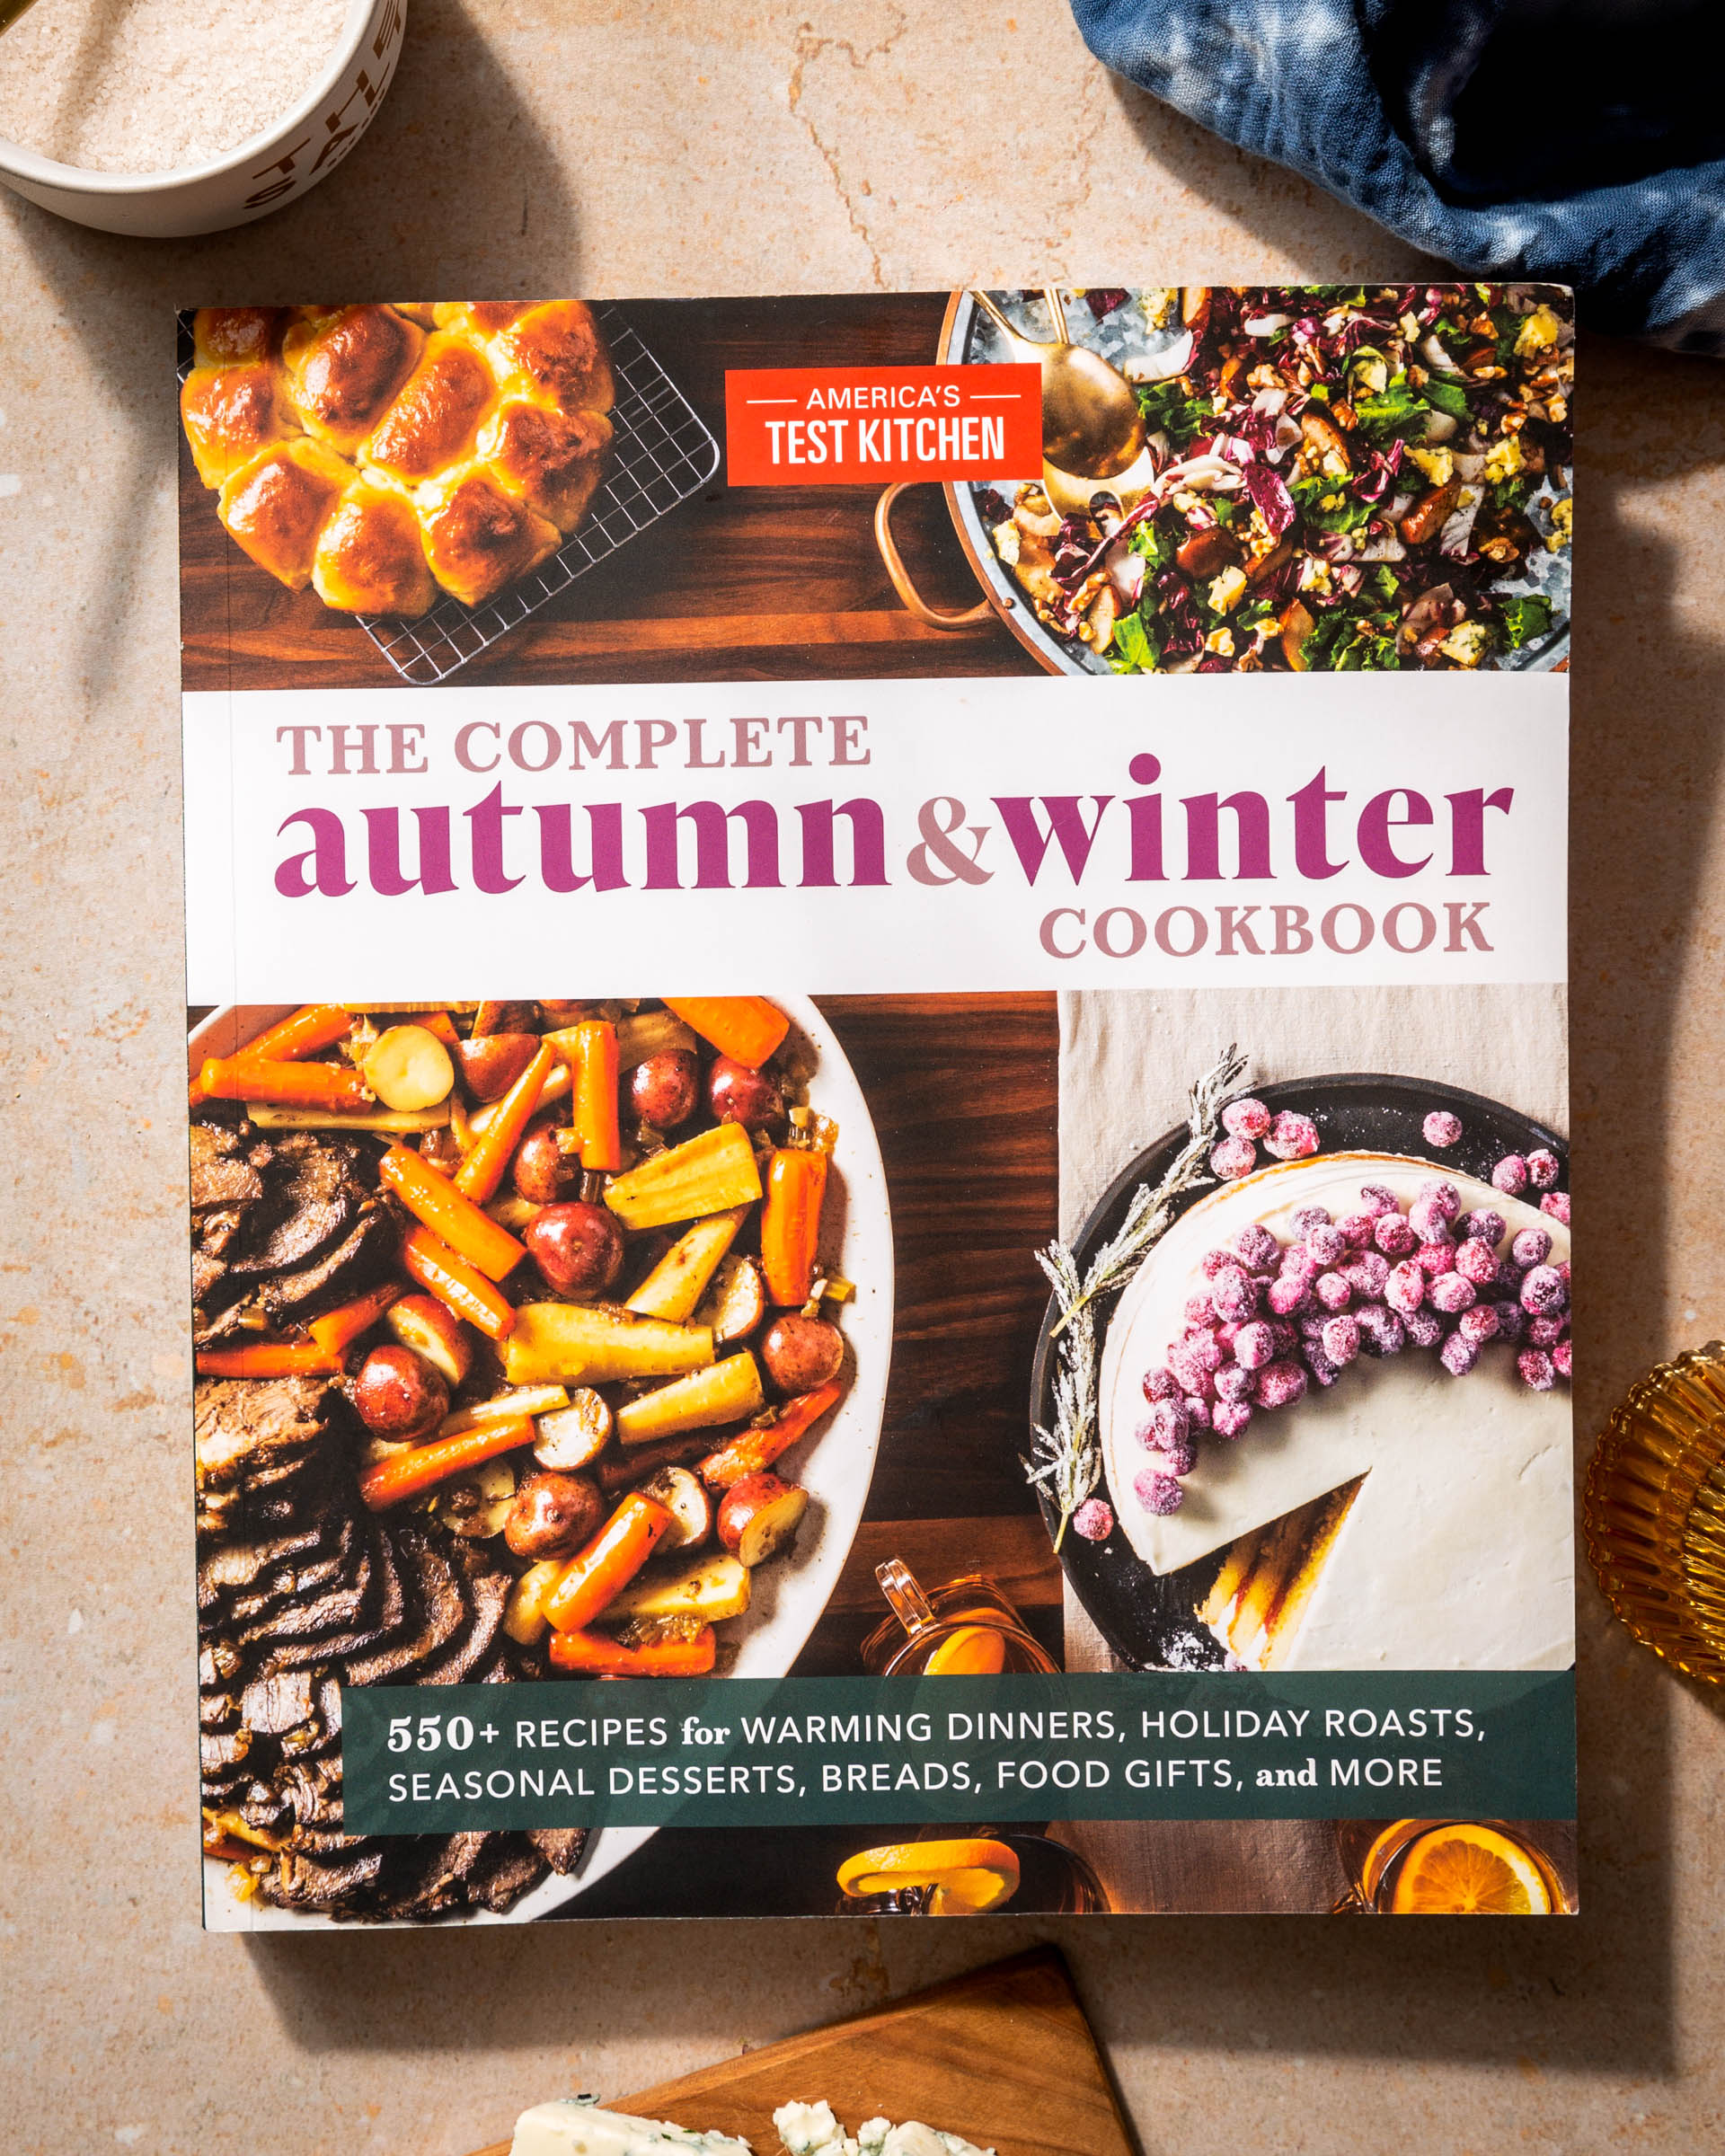 The Complete Autumn & Winter Cookbook from America's Test Kitchen